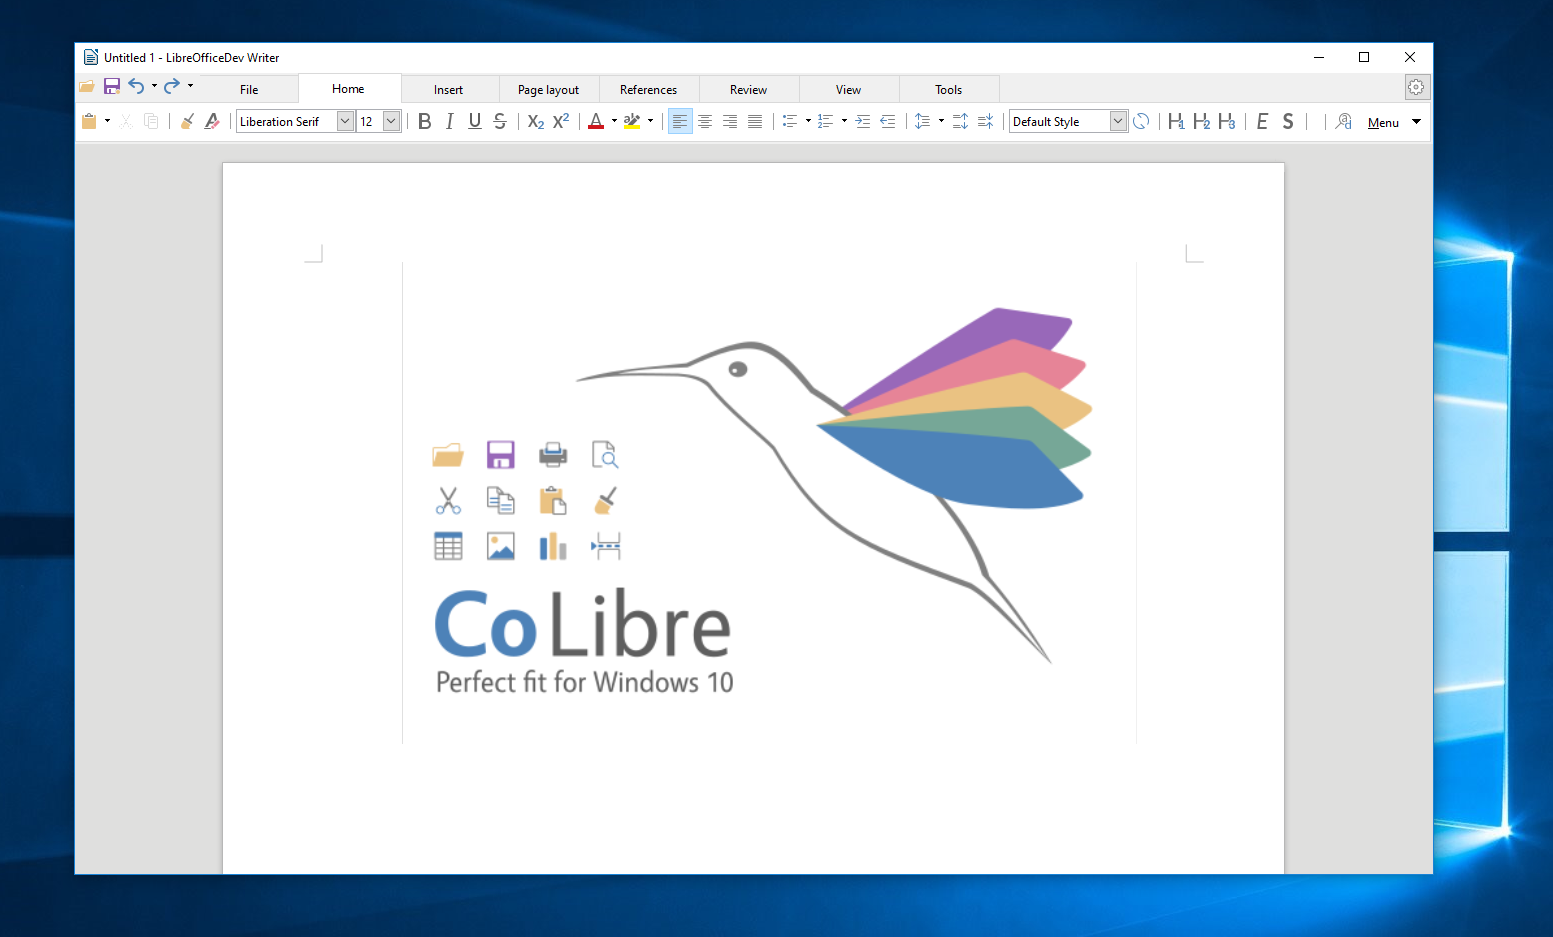 about libreoffice for windows 10